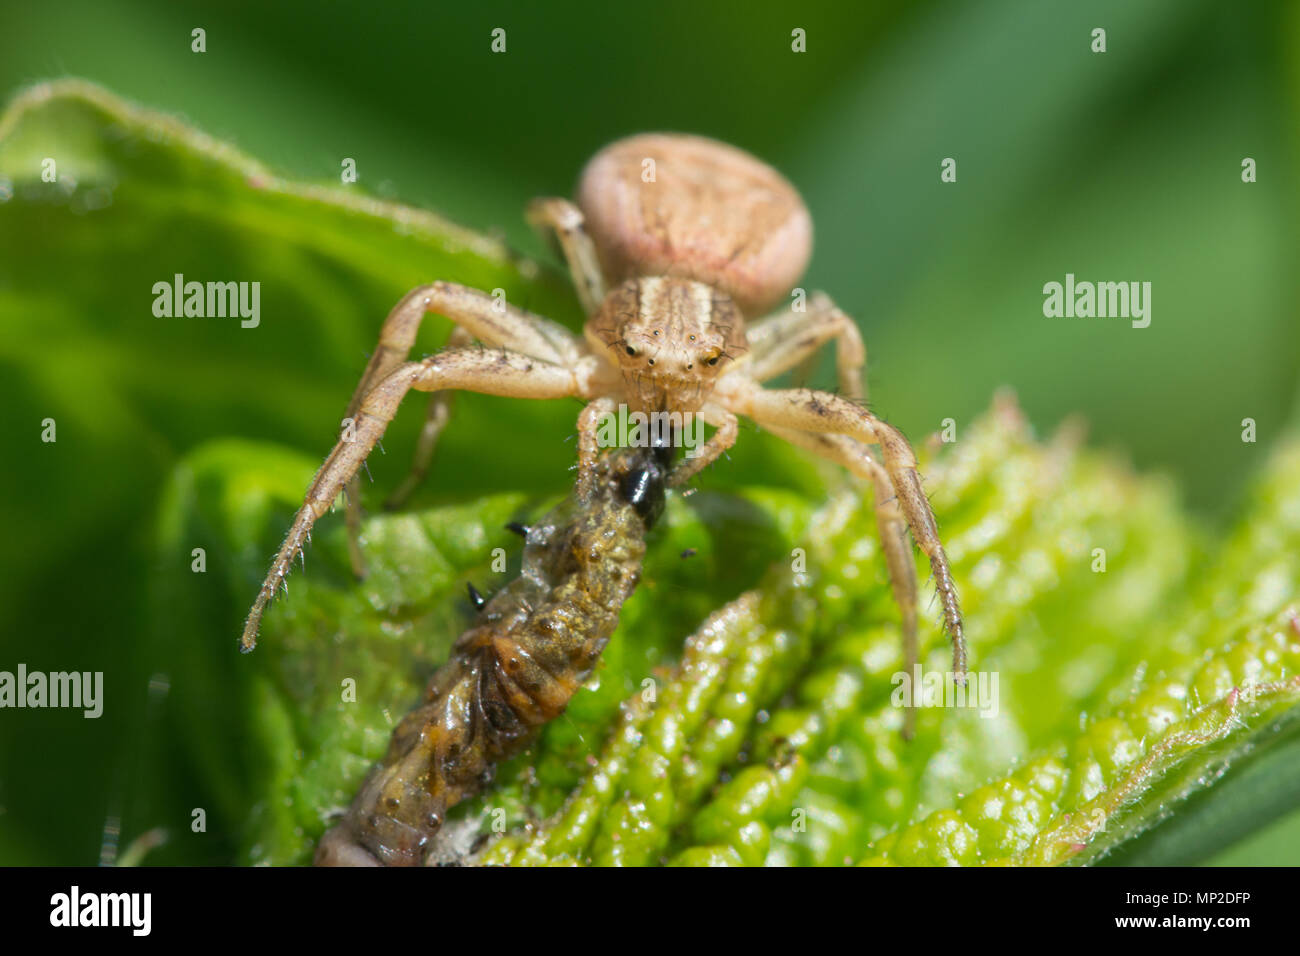 Crab spider with prey (a larva), UK Stock Photo